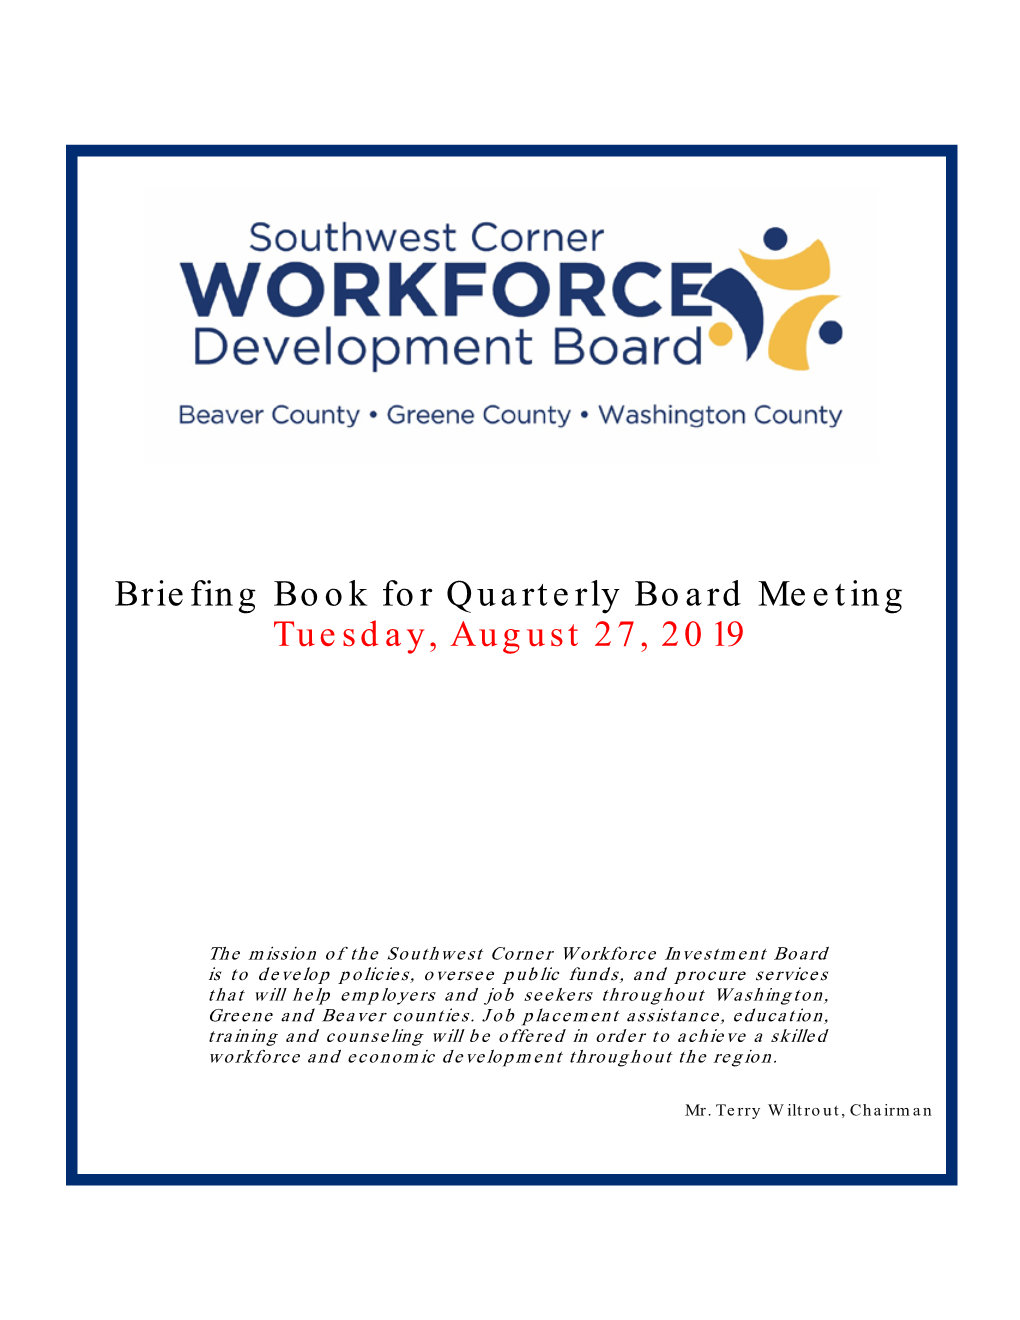 Briefing Book for Quarterly Board Meeting Tuesday, August 27, 2019